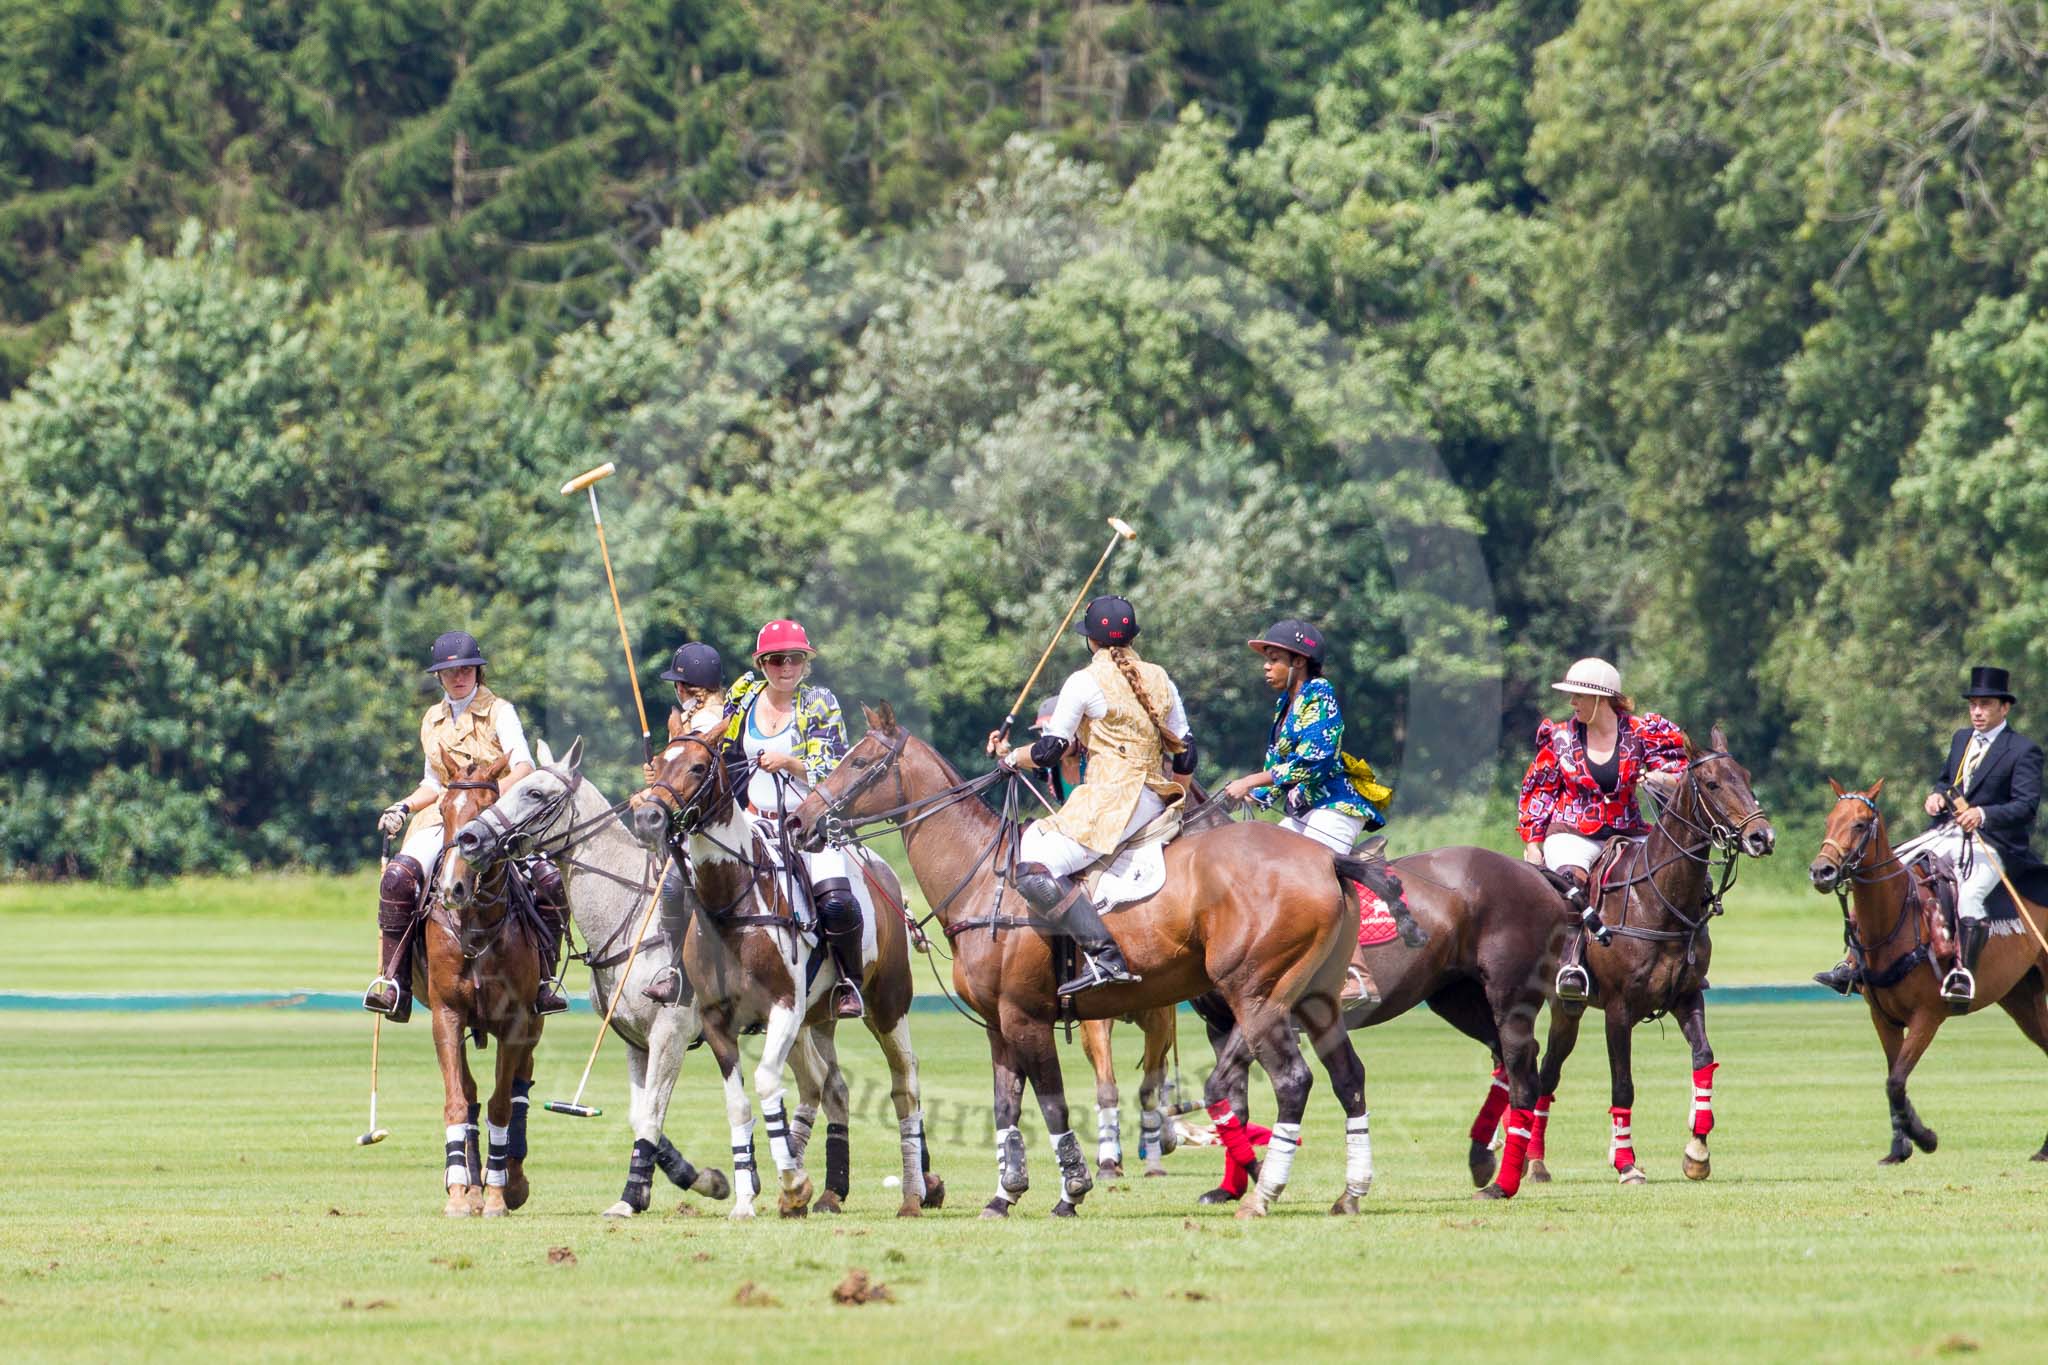 7th Heritage Polo Cup semi-finals: Play off..
Hurtwood Park Polo Club,
Ewhurst Green,
Surrey,
United Kingdom,
on 04 August 2012 at 13:56, image #193